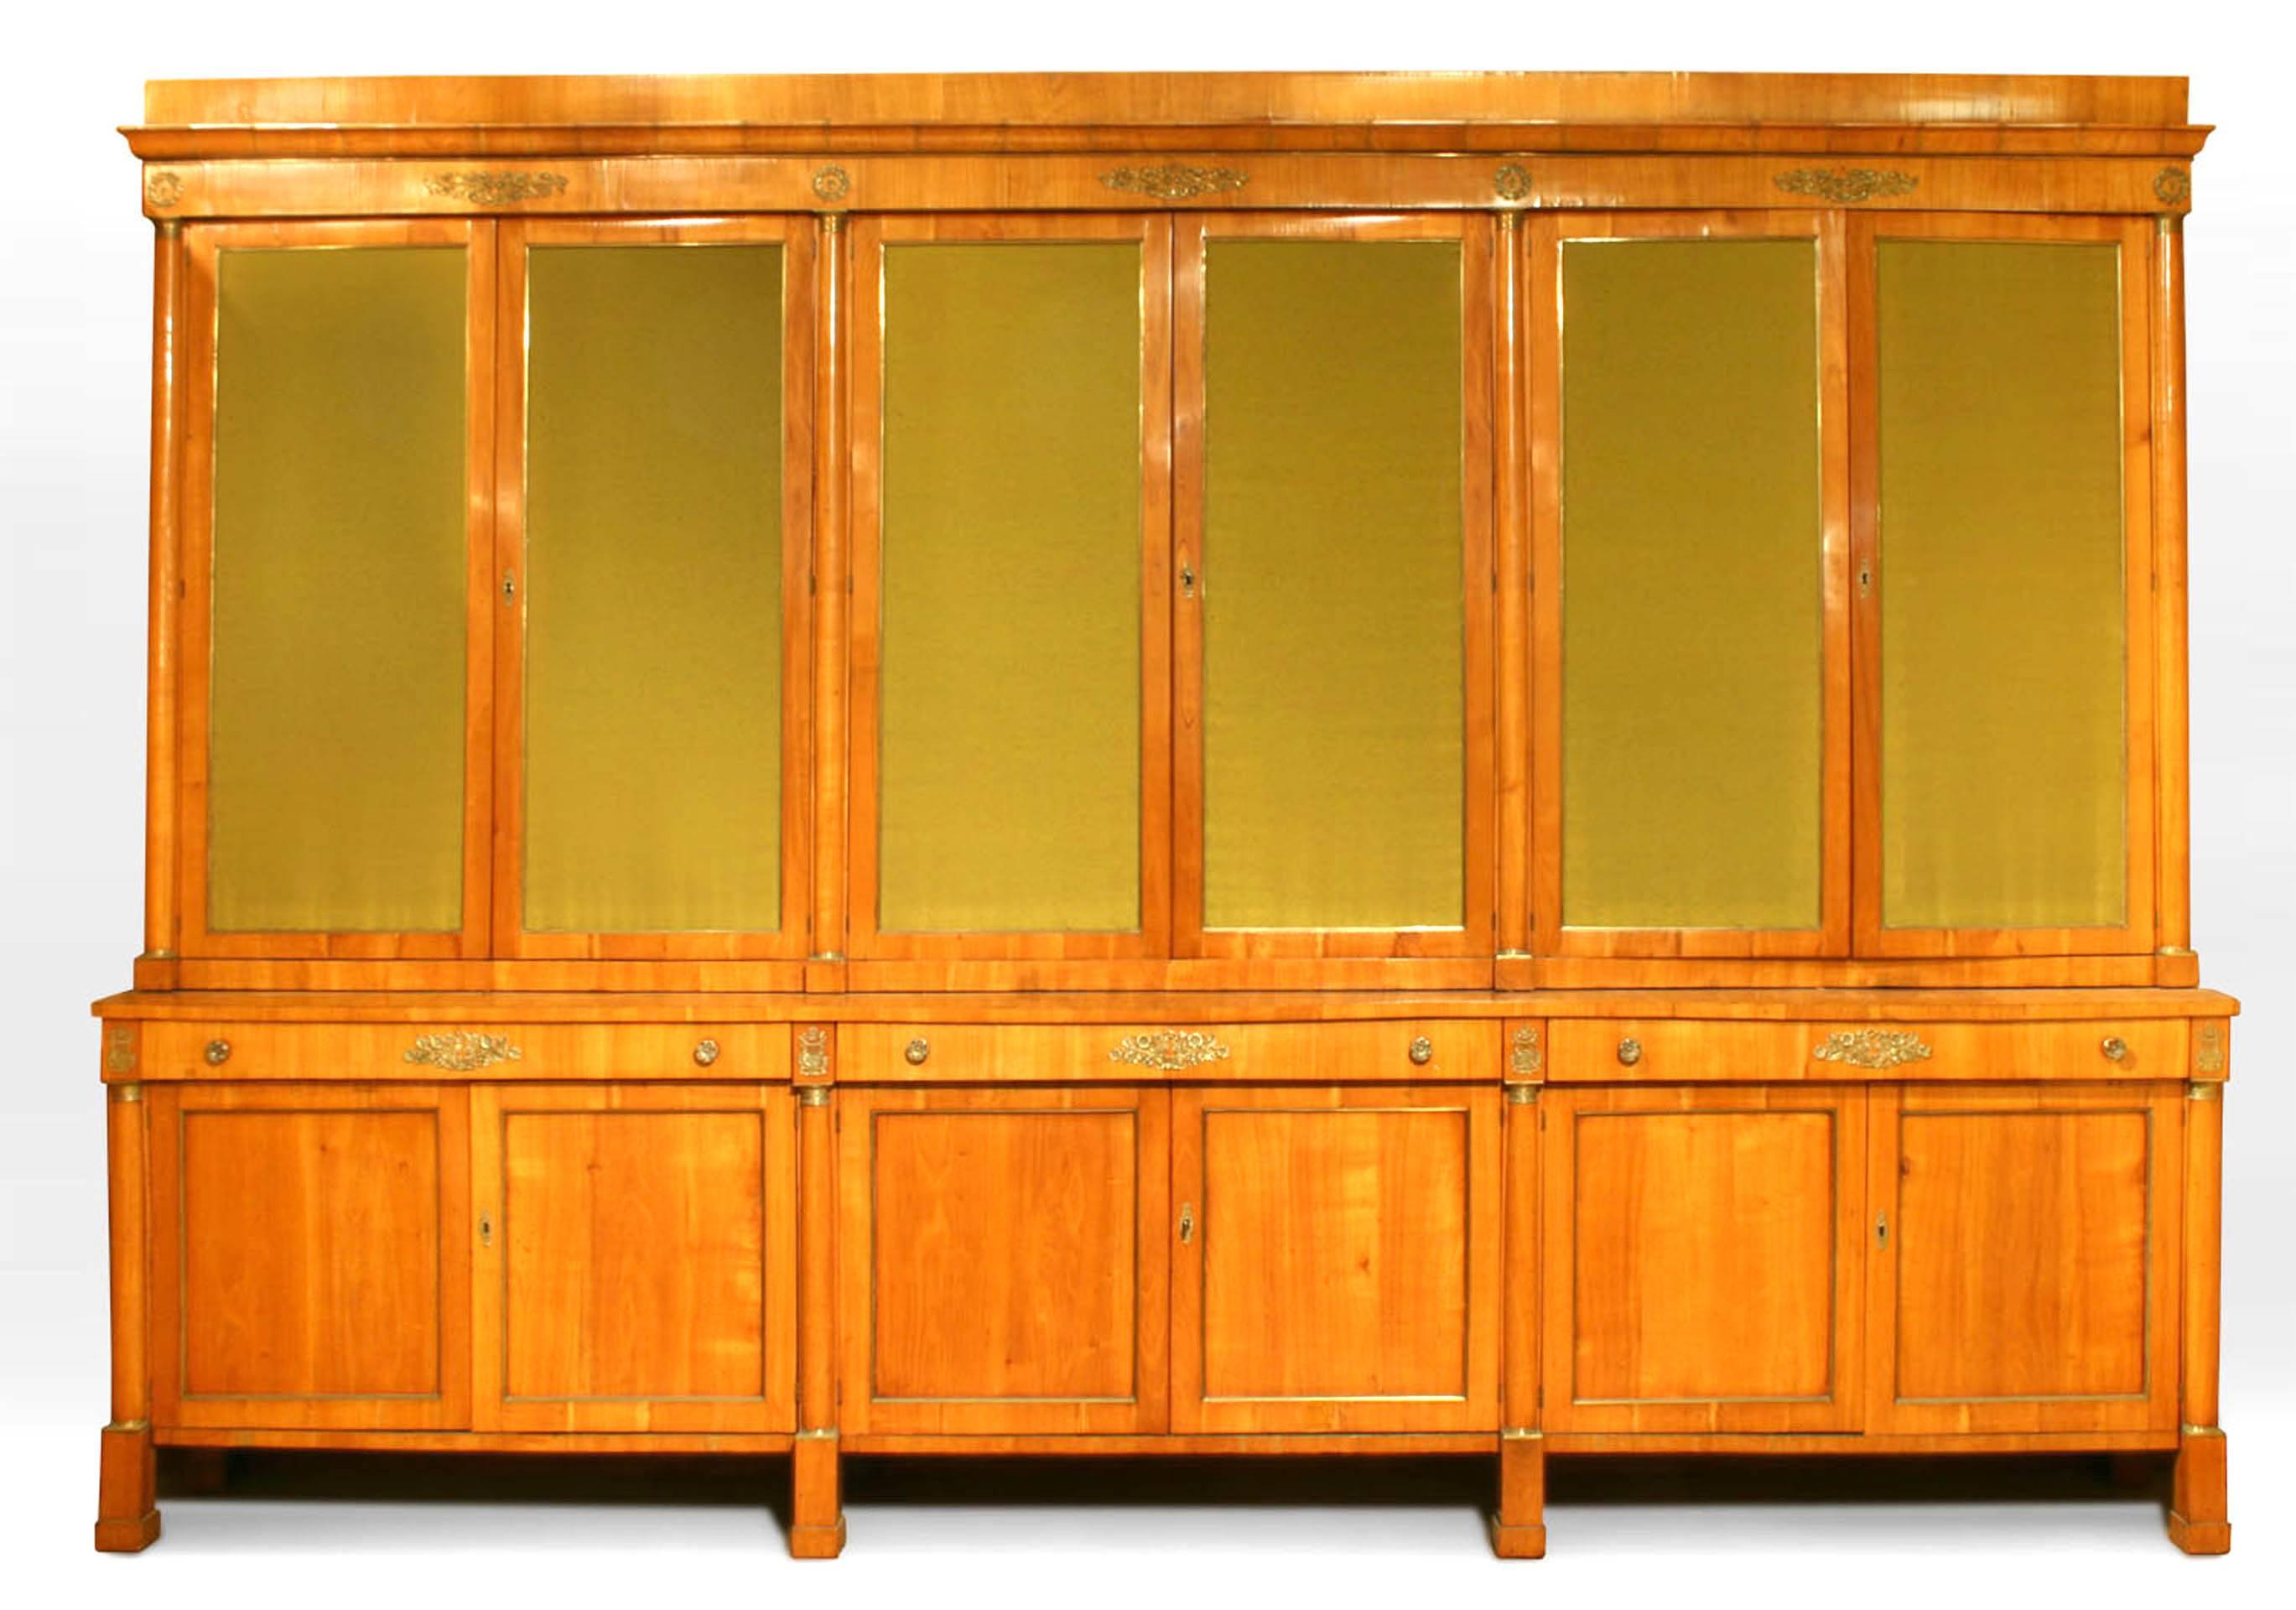 Austrian Biedermeier large (19th Century) cherrywood and brass trimmed 12 door cabinet with column sides and fabric in top doors.
